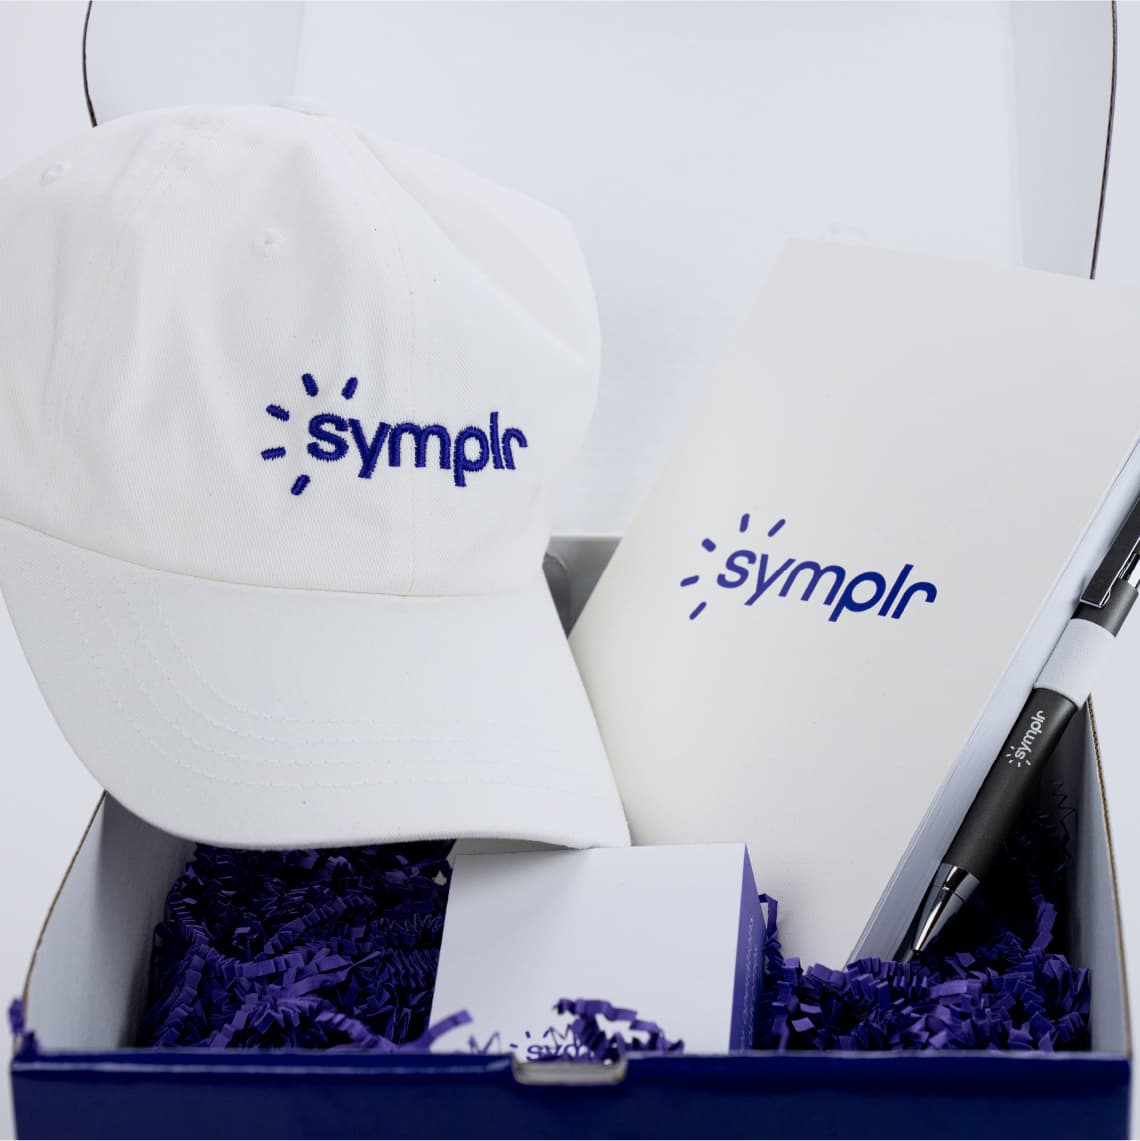 Examples of a gift box with Marketing materials including swag items like baseball caps, pens, and notepads